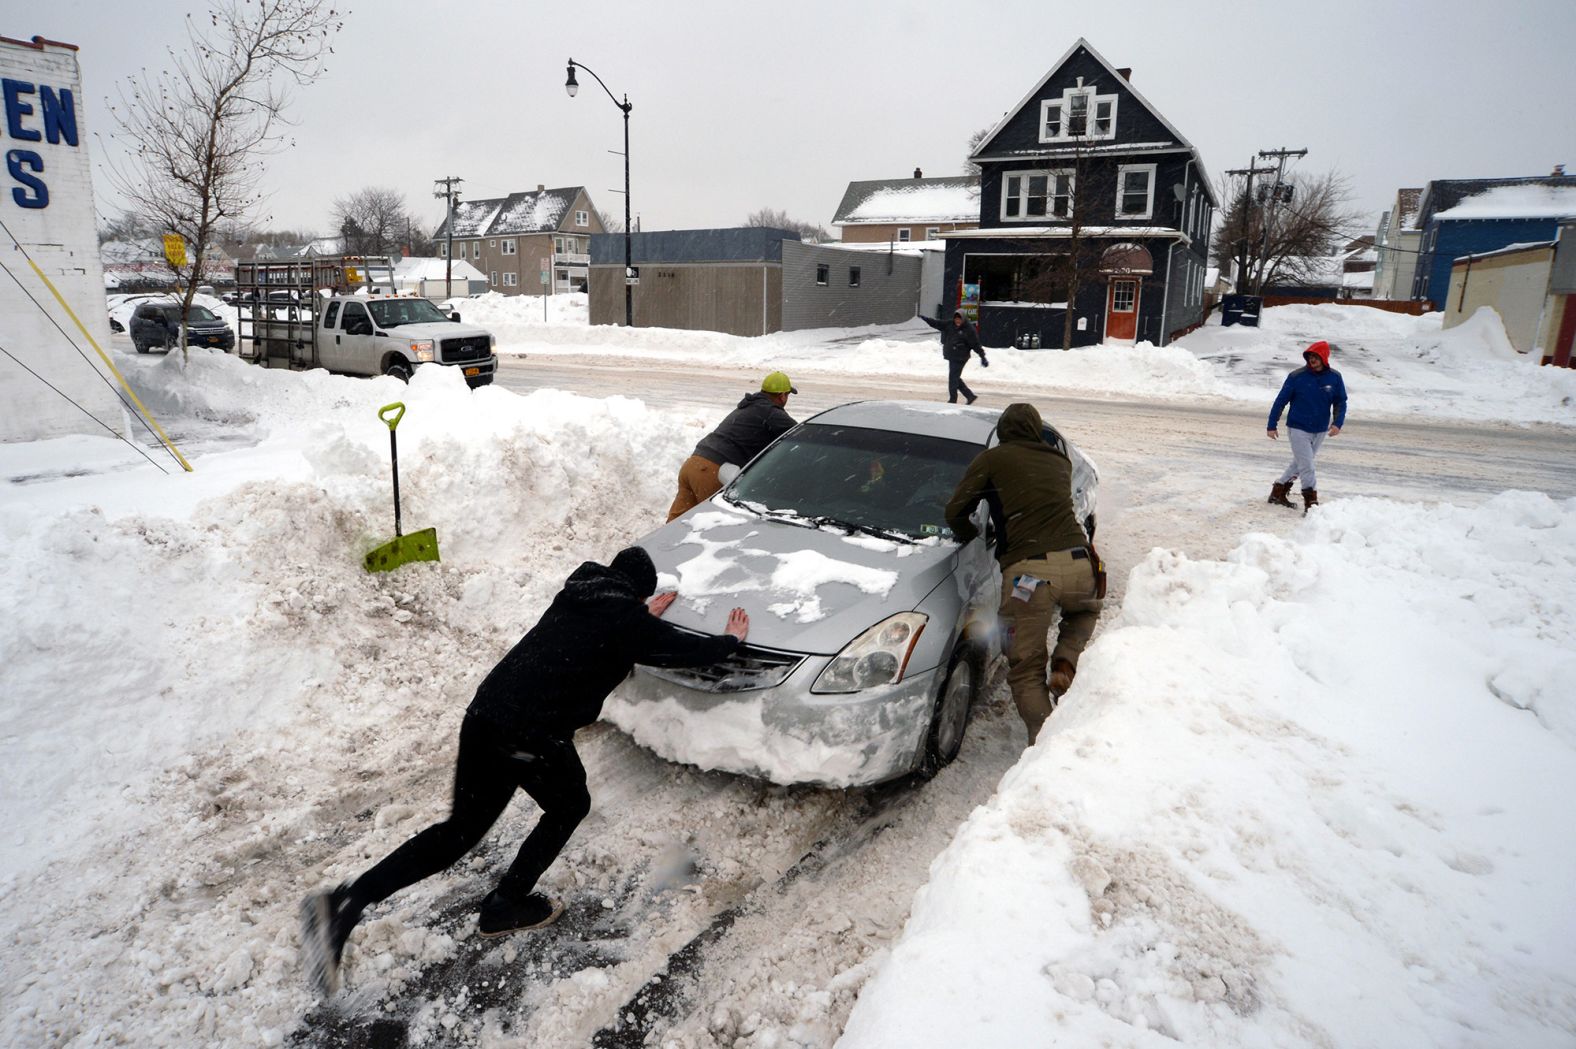 People help push a car out of snow in Buffalo on Tuesday, December 27.